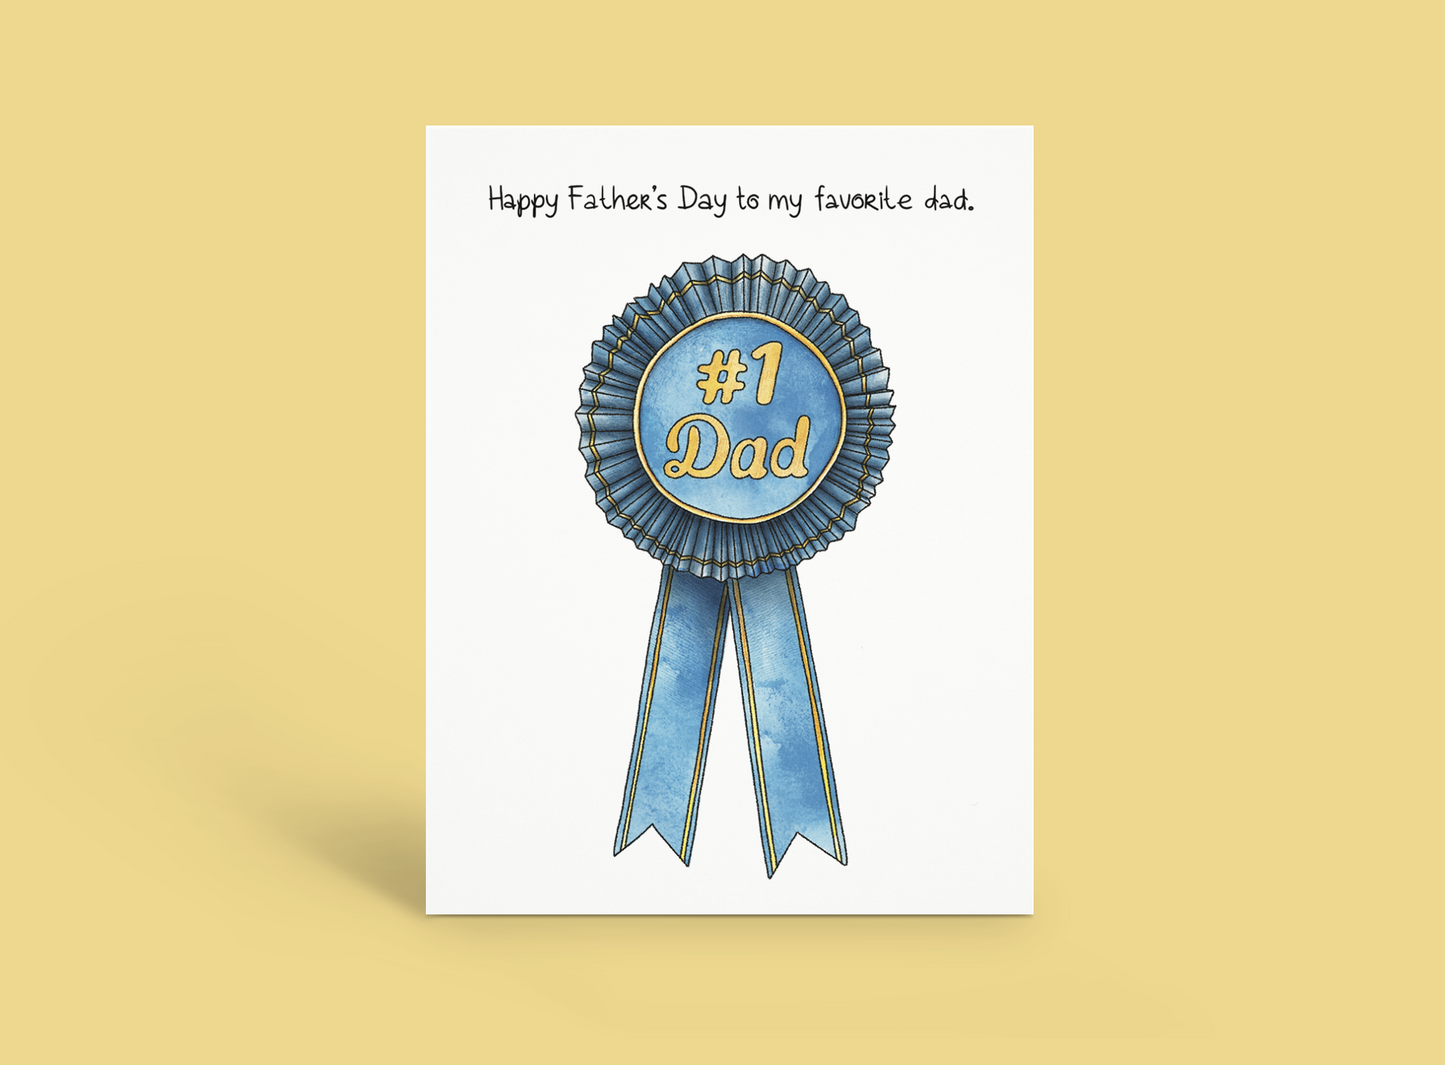 Playing Favorites | Father's Day